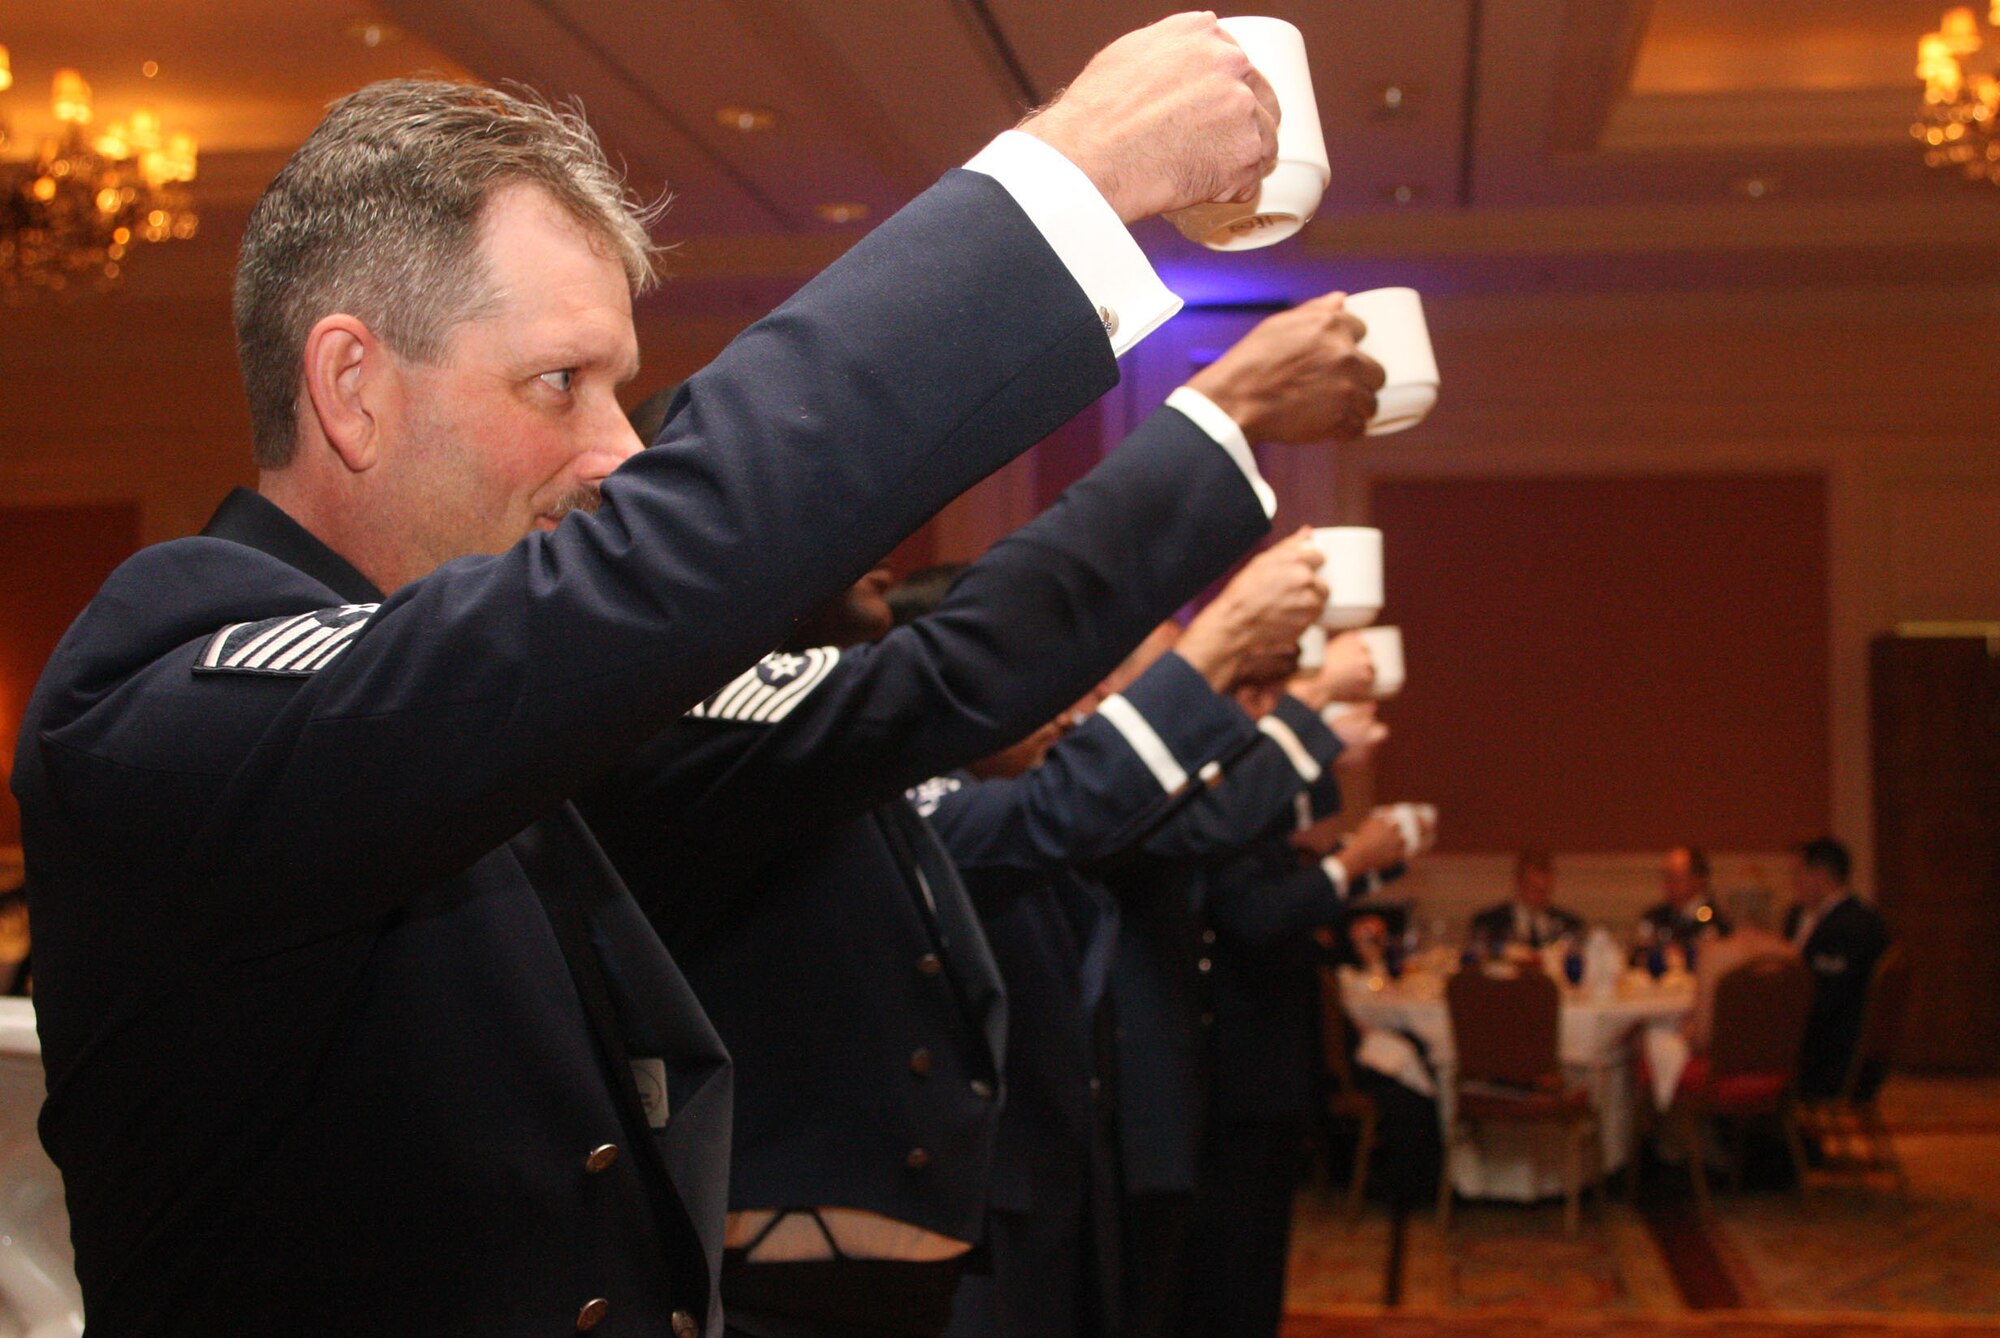 Members of the 94th Airlift Wing Honor Guard take their turn at the grog raising a cup "to the mess" at the 94th Airlift Wing Dining Out held in downtown Atlanta, Ga., Oct. 1. (U.S. Air Force photo/Don Peek)